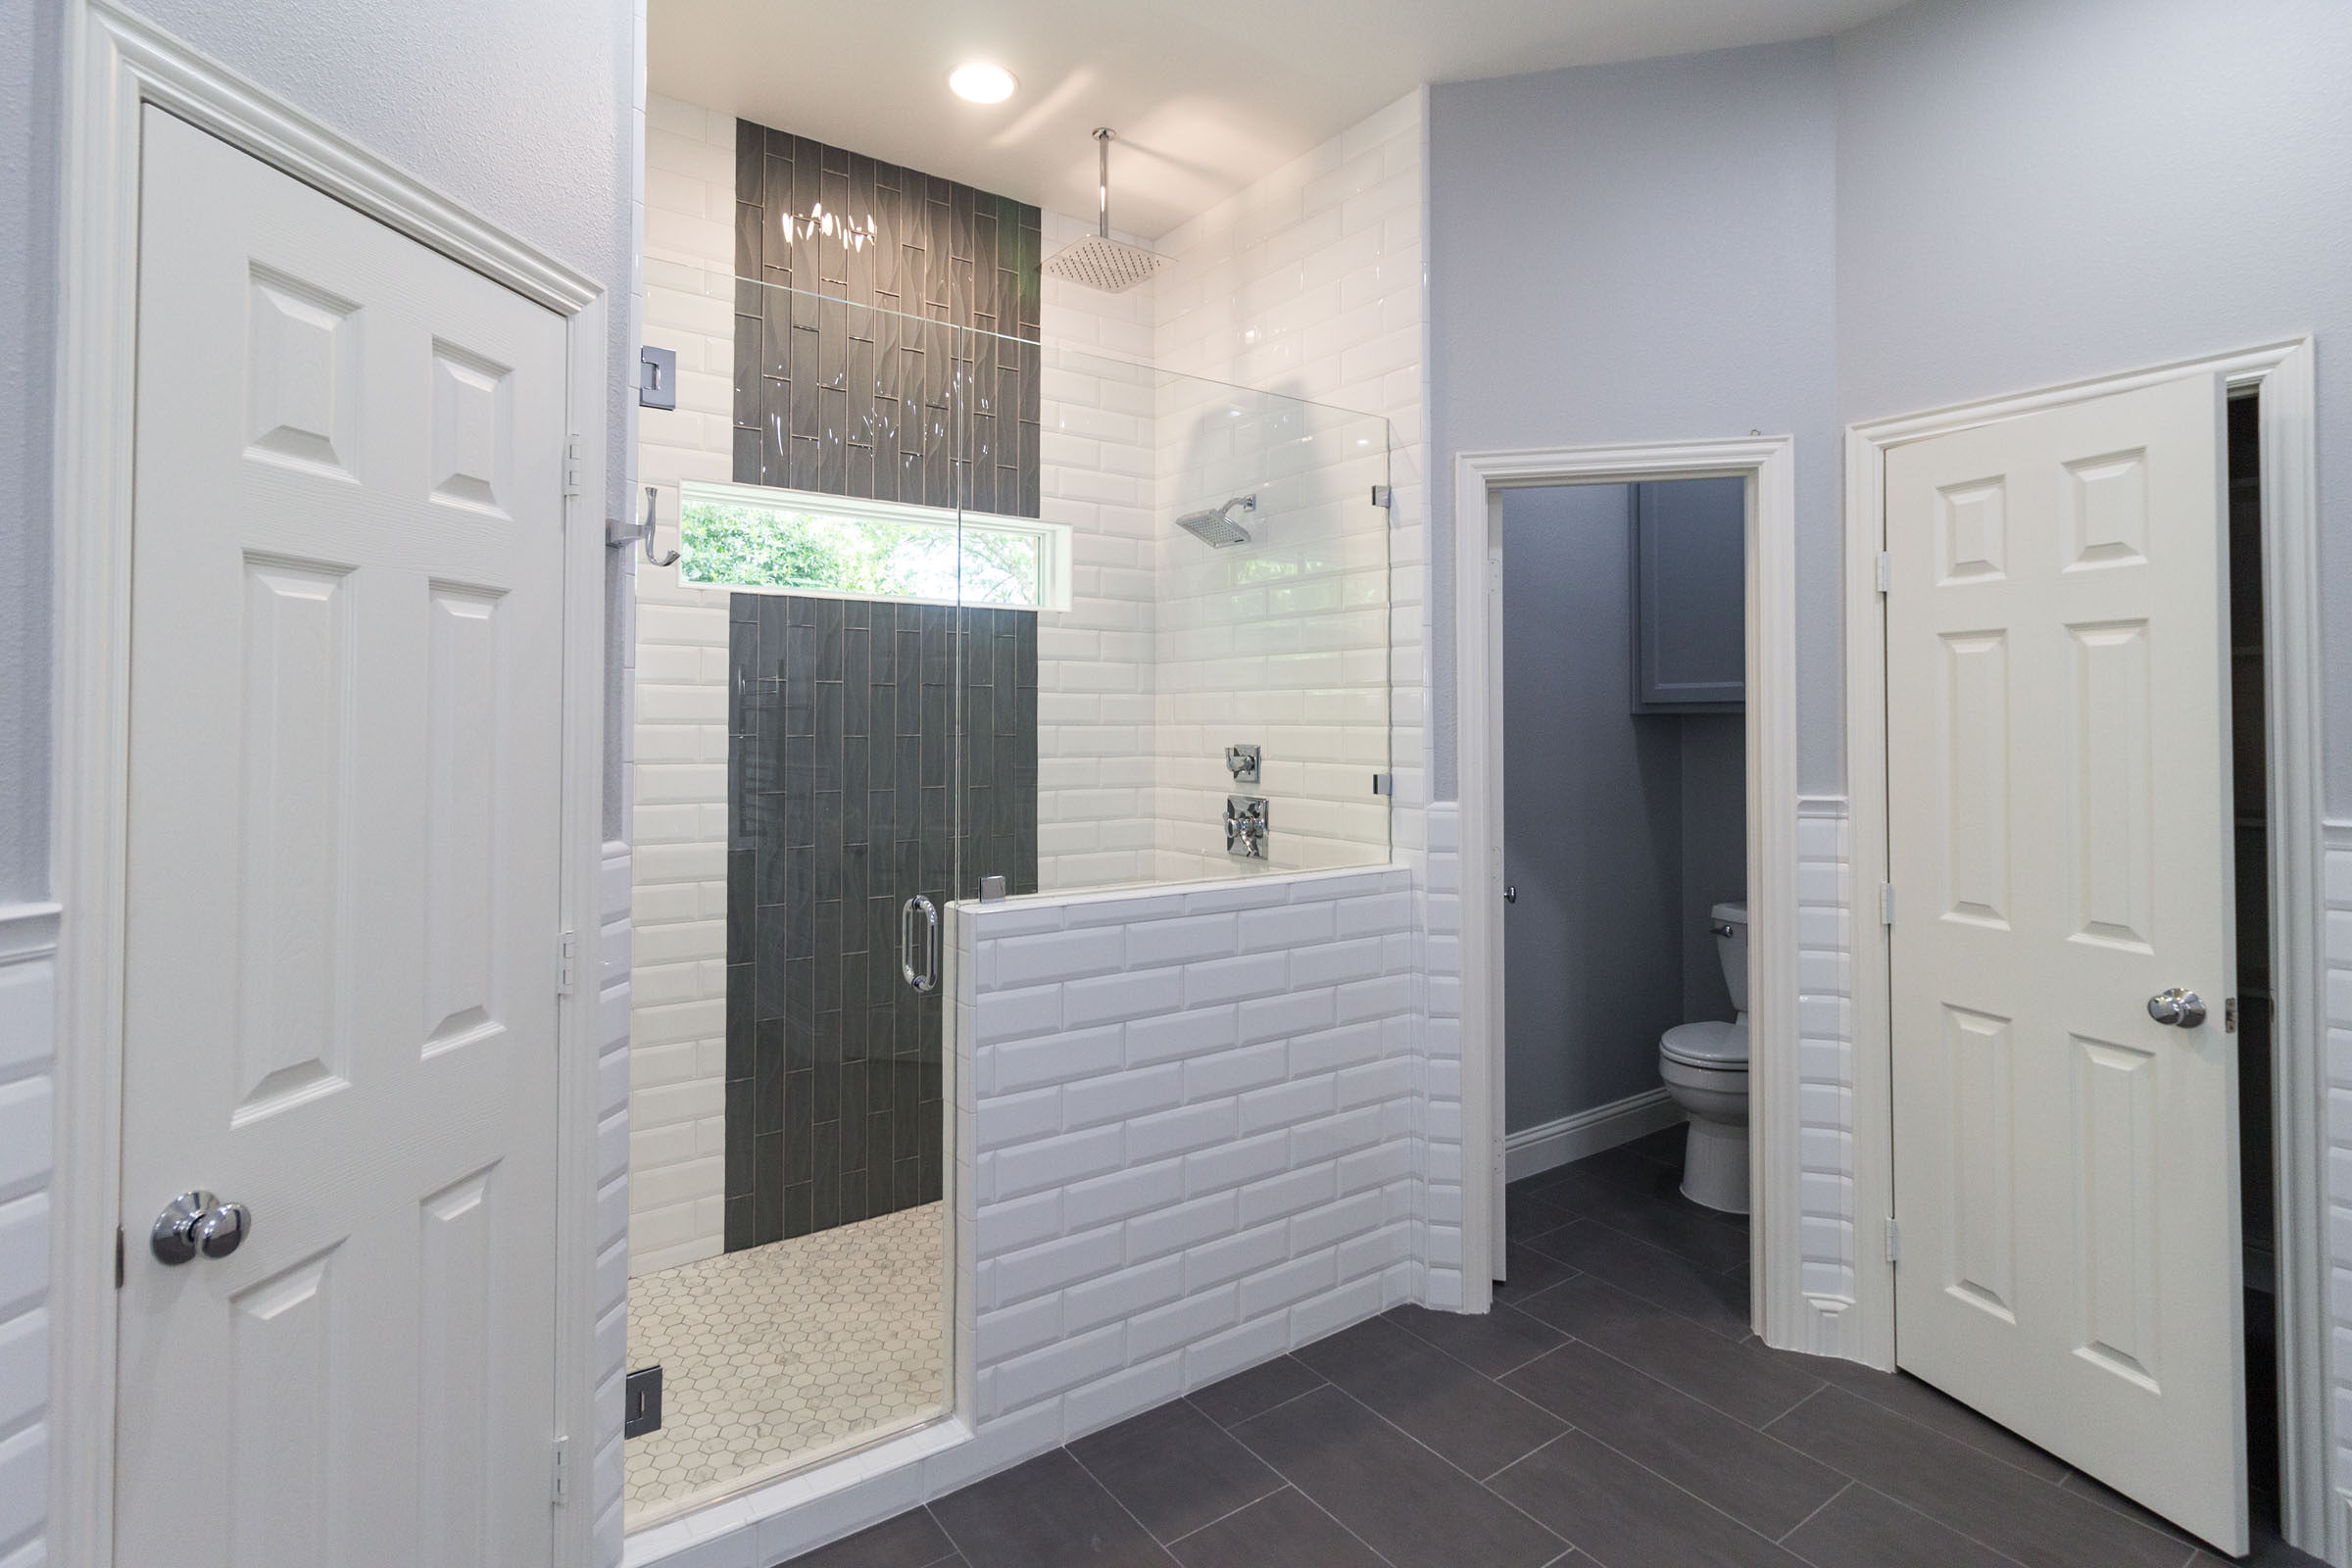 Contemporary bathroom remodel, grey and white, subway tile, grey flooring, toilet closet, walk in shower, chrome shower head